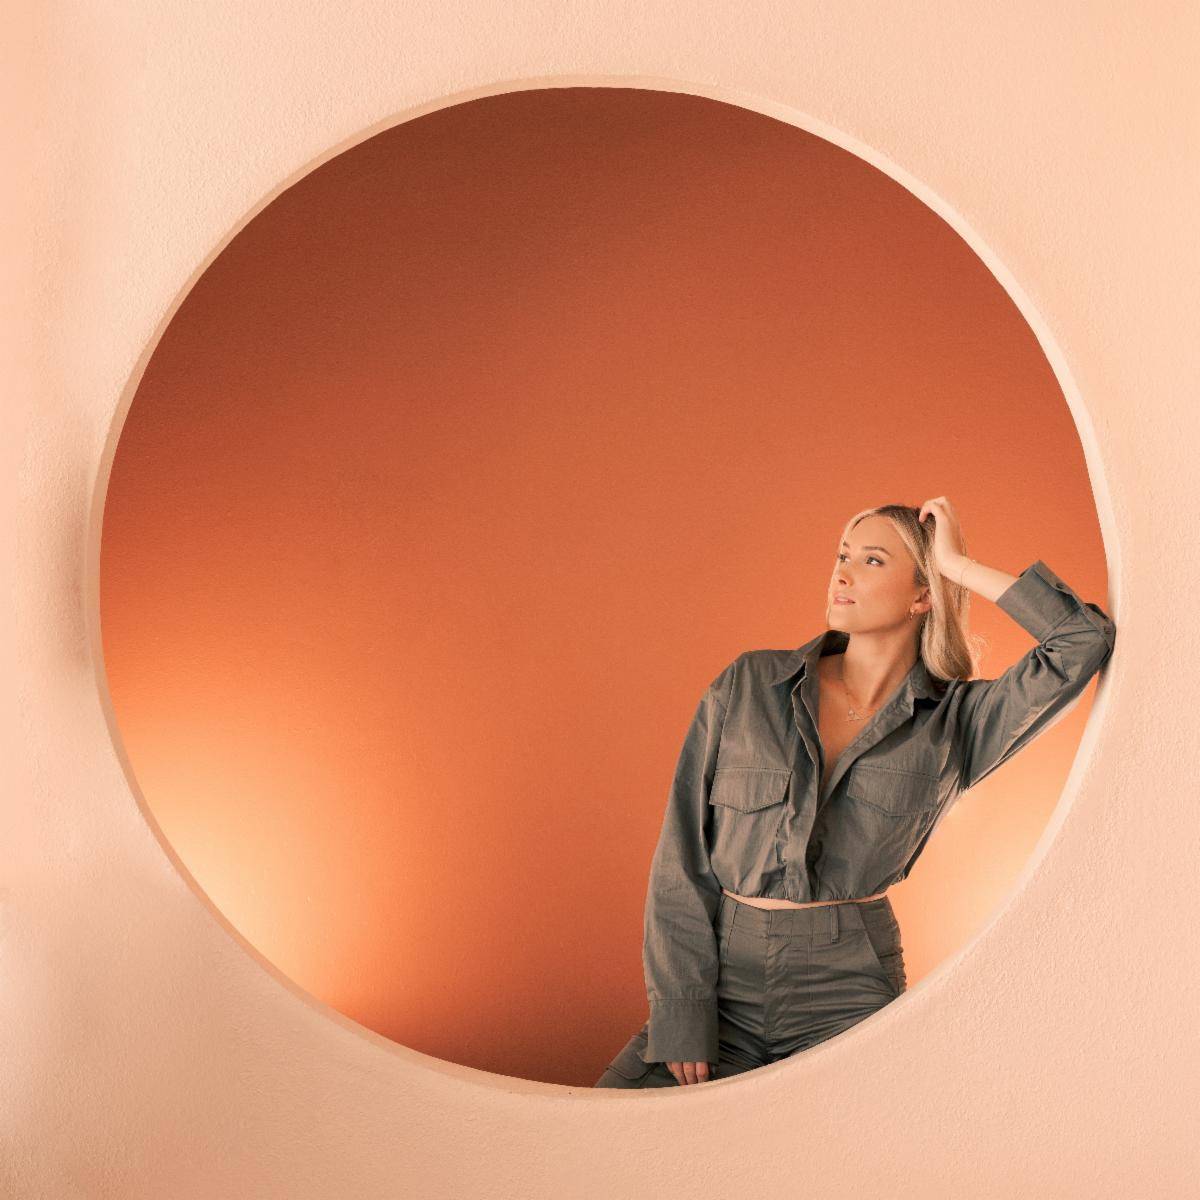 A woman in a gray outfit poses thoughtfully within a large circular orange frame against a matching orange background. Juliana Tucker stands confidently, her expression contemplative.